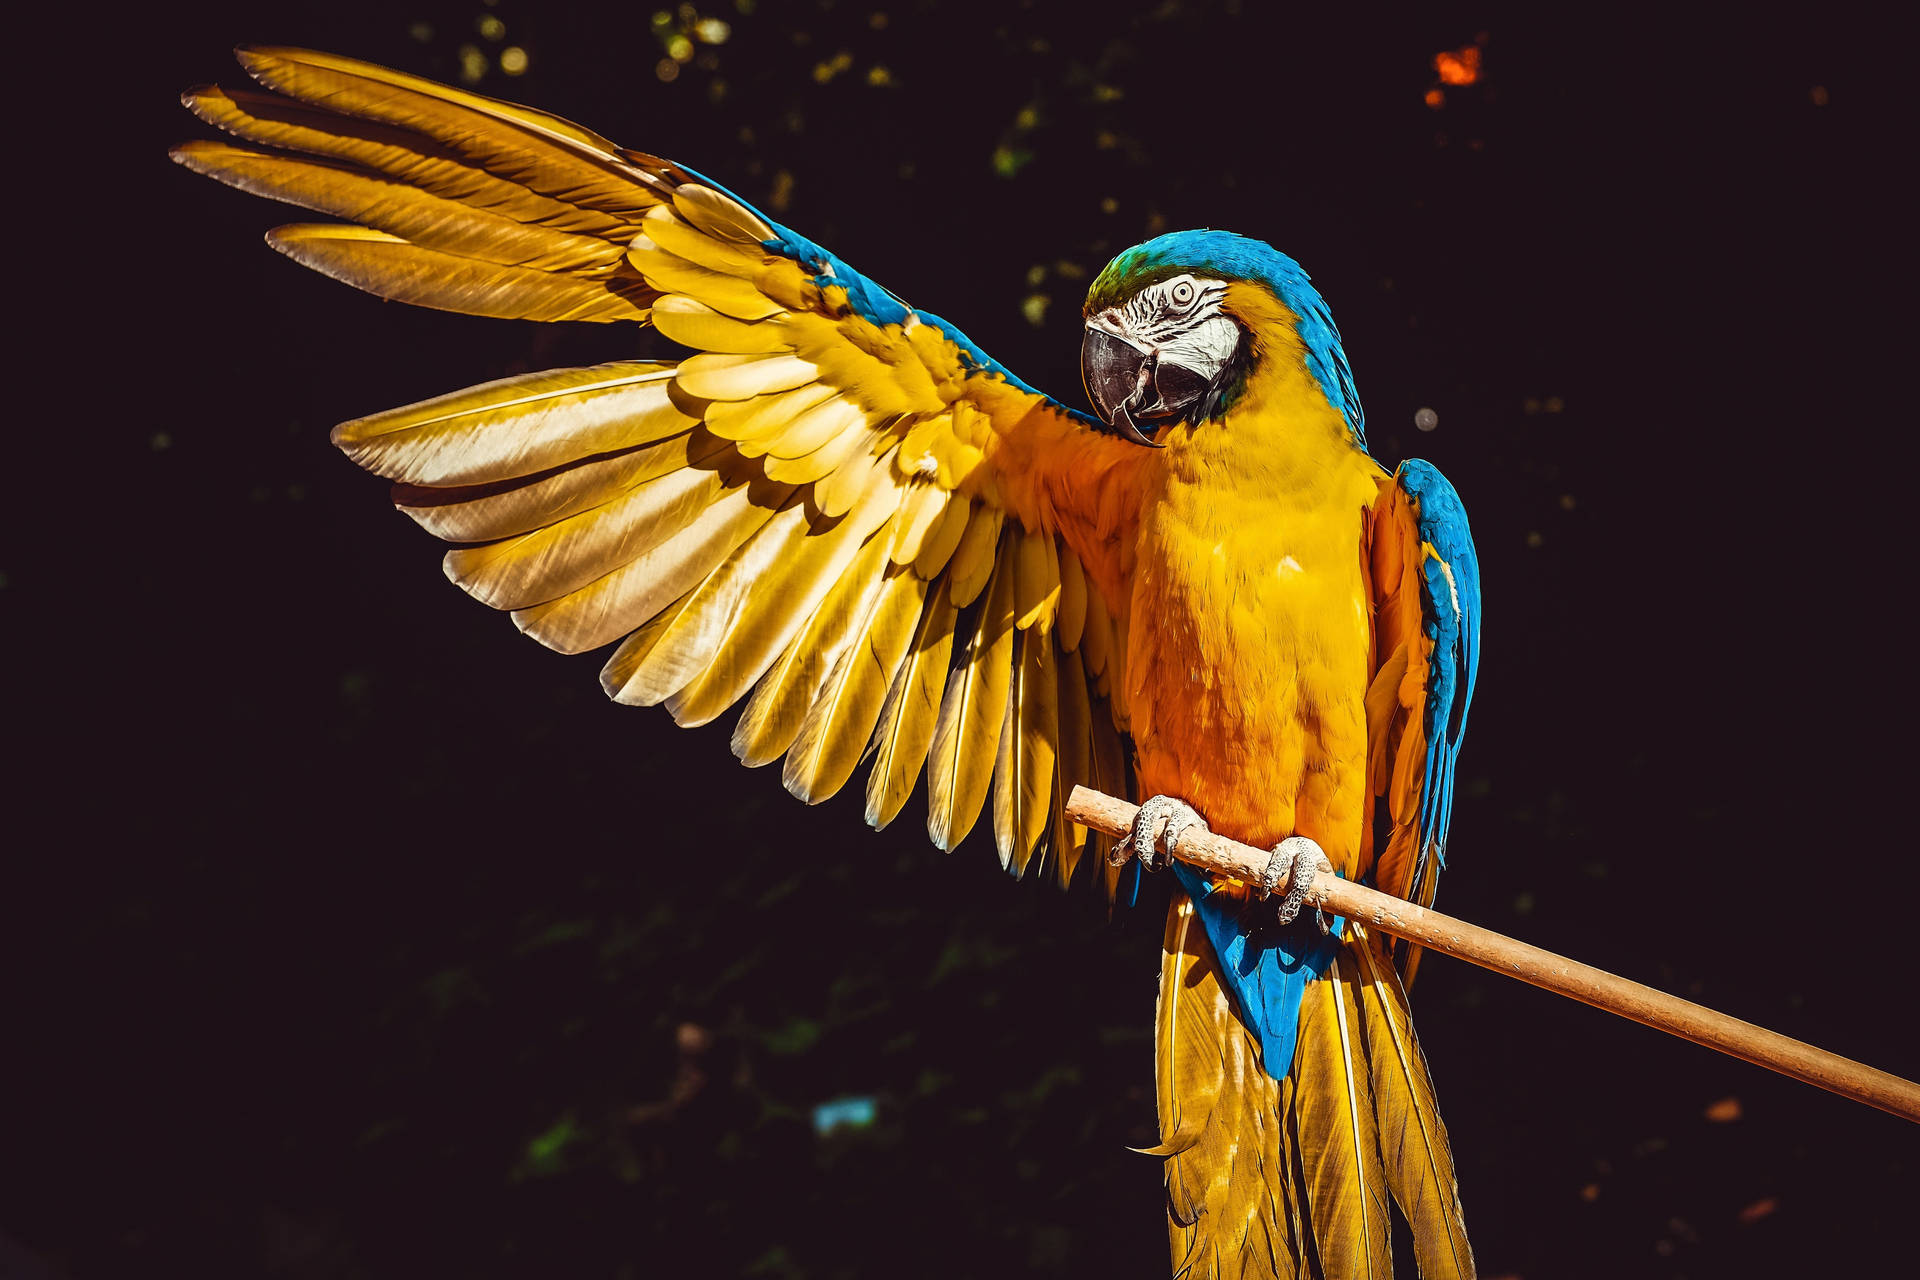 Caption: Vibrant Blue And Yellow Macaw In The Wild Background